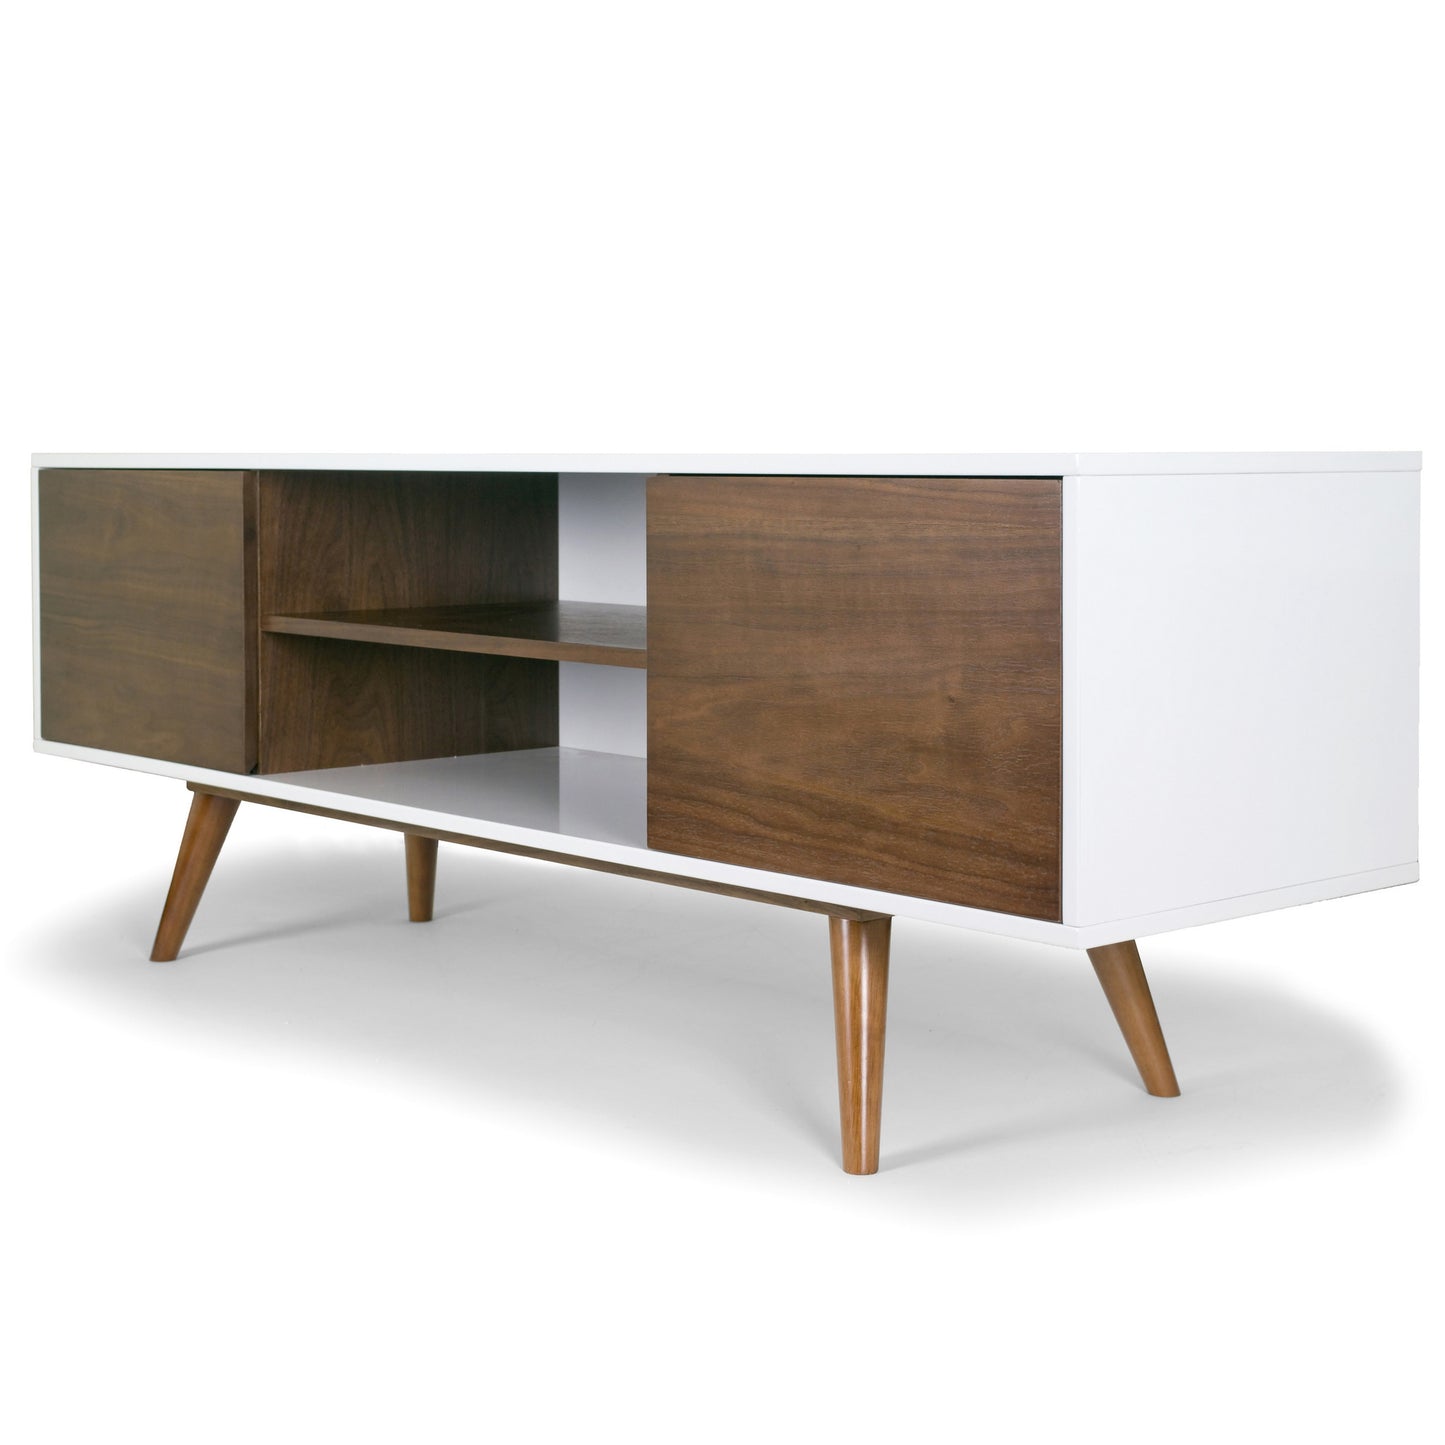 Ailsa Scandinavian Style TV Stand with Walnut and White Finish